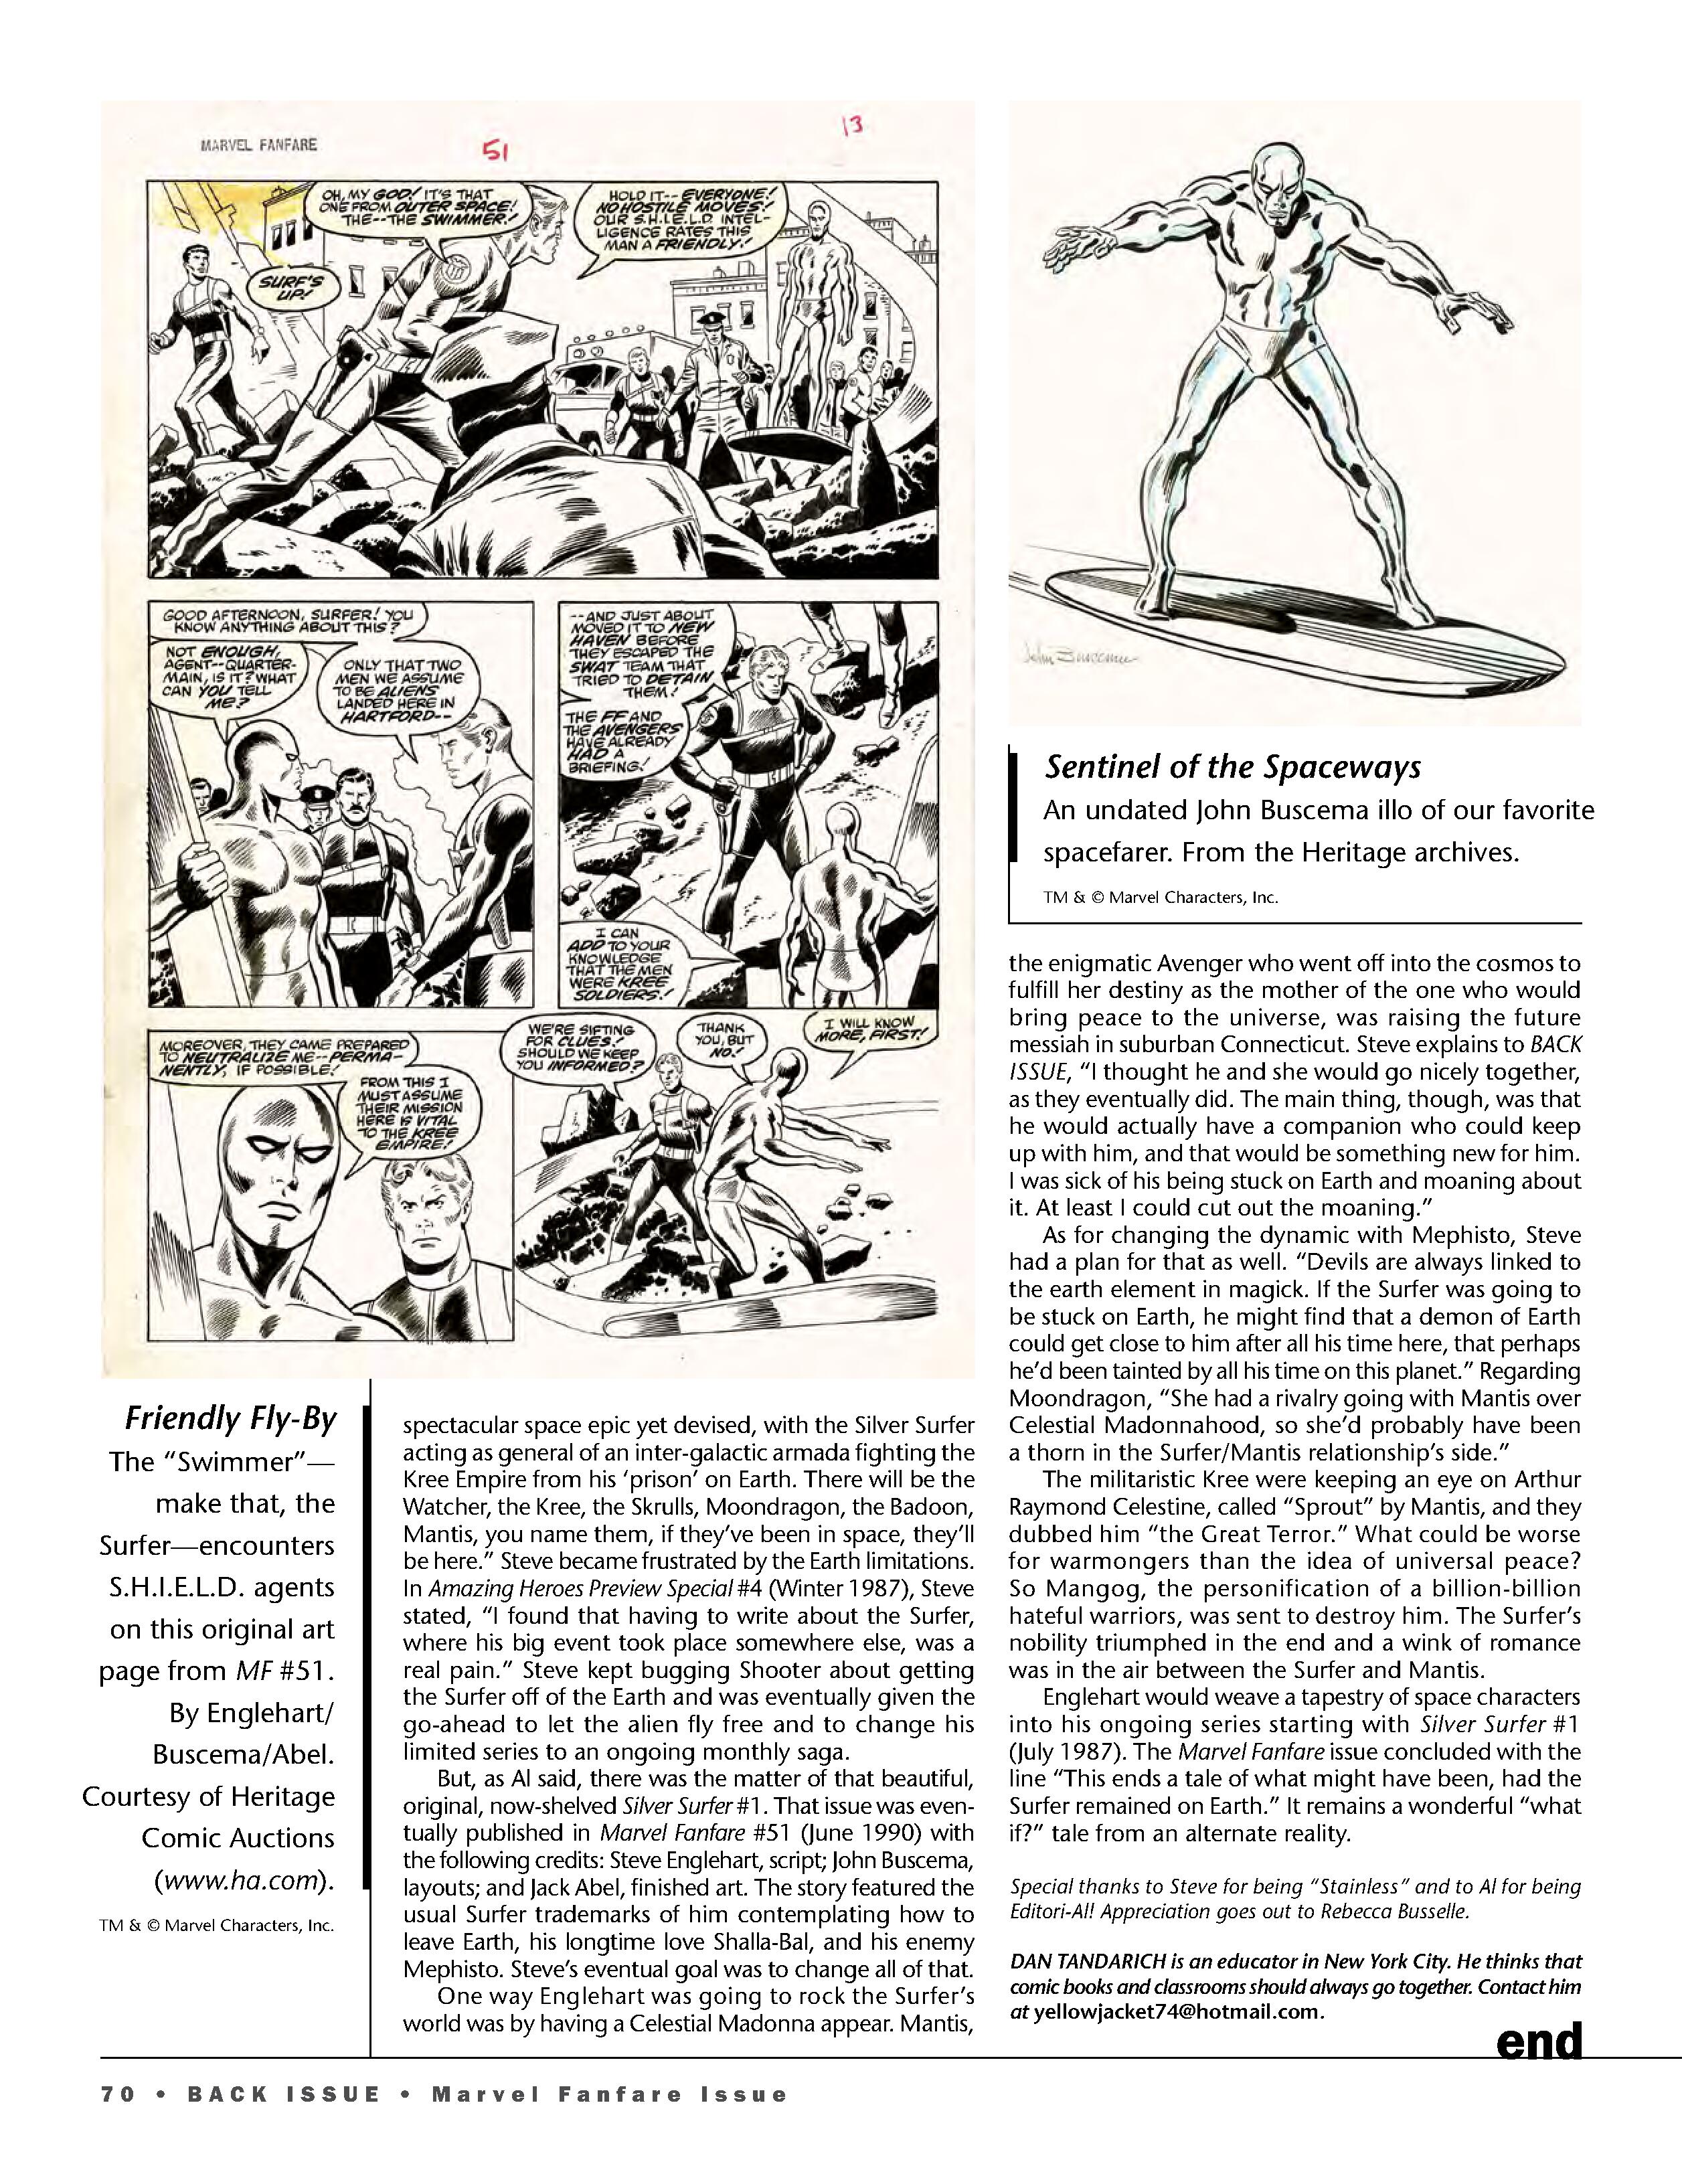 Read online Back Issue comic -  Issue #96 - 72